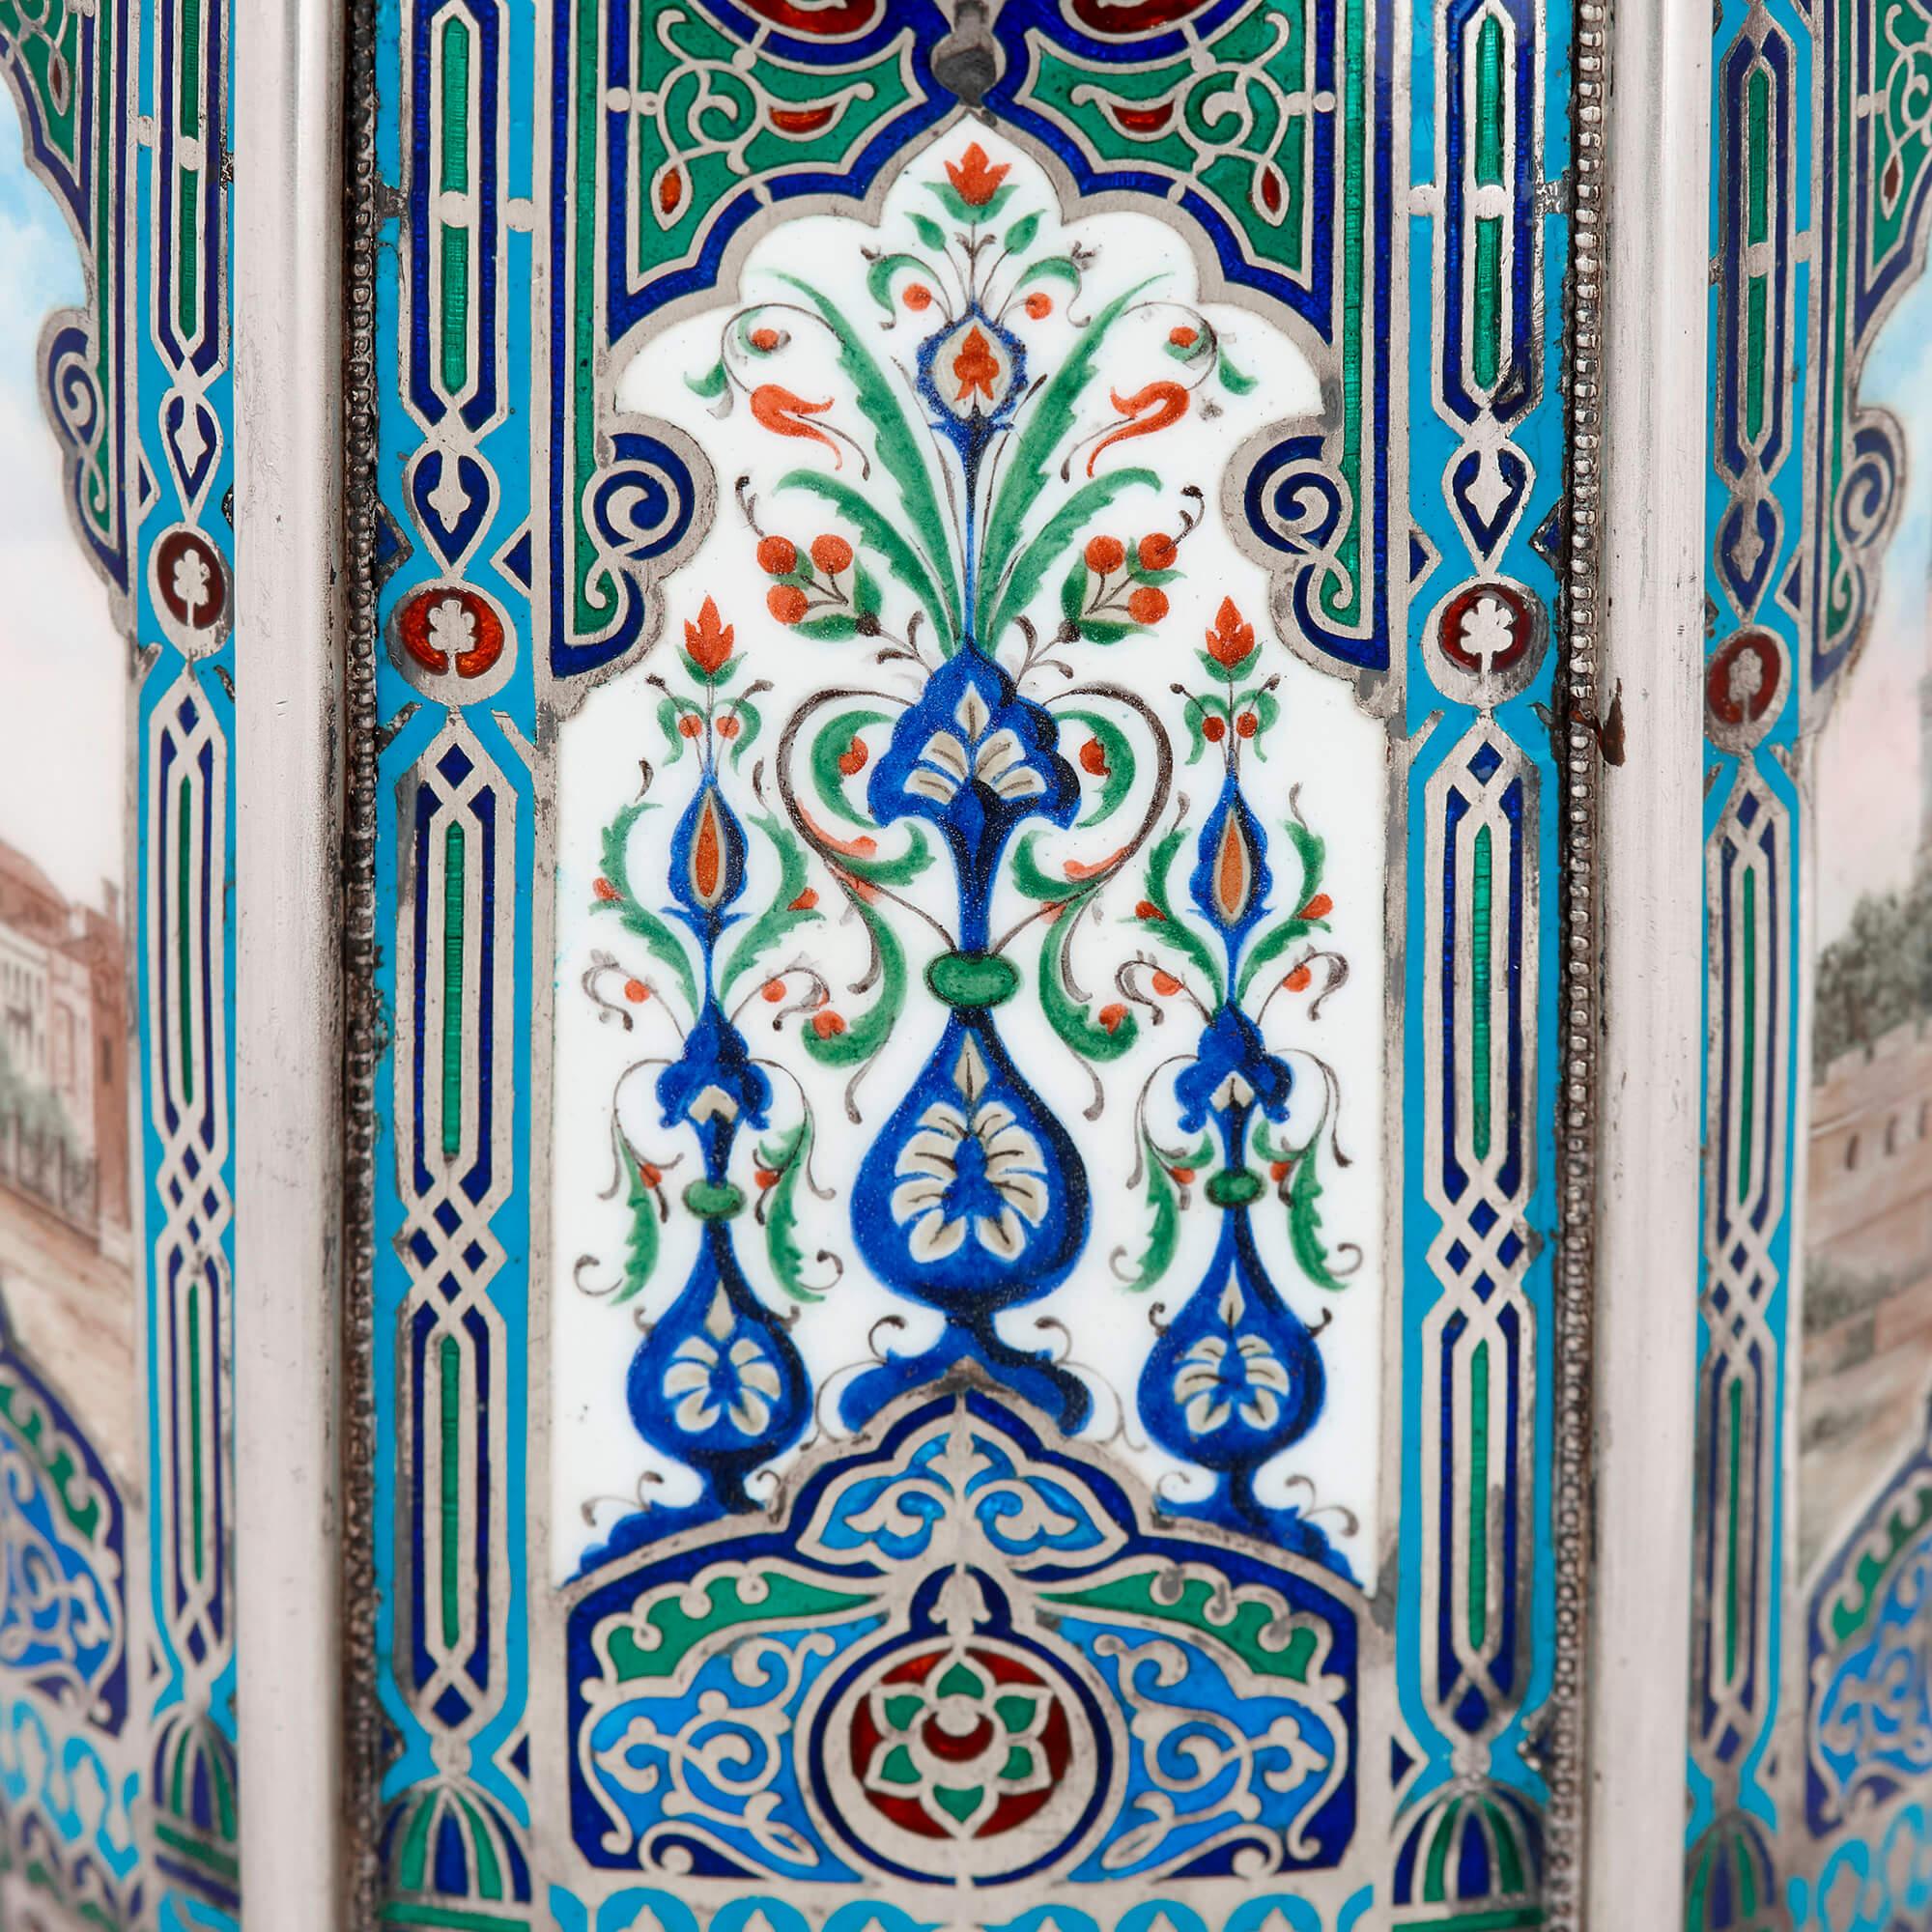 19th Century Unusual Russian-Made Silver and Enamel Islamic Vase For Sale